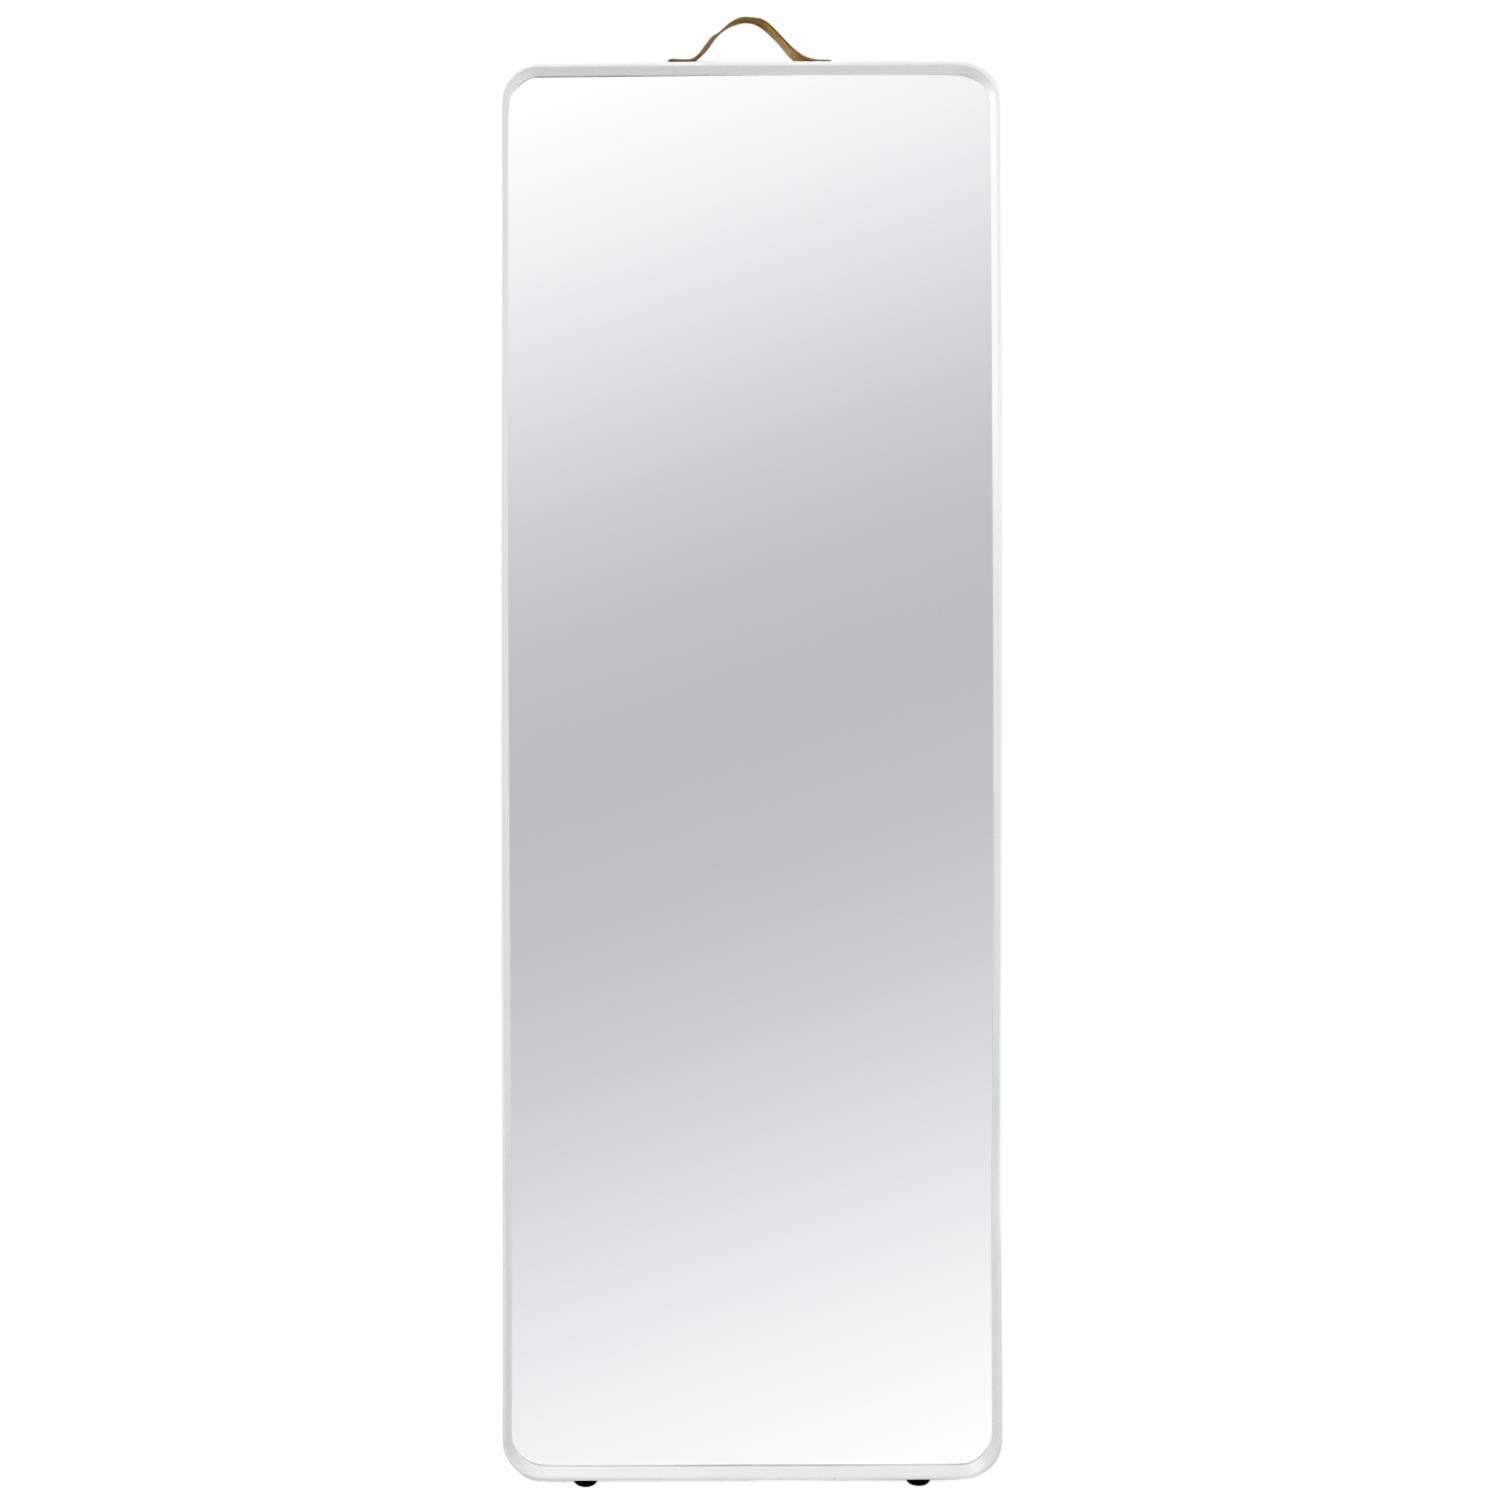 Rectangular Floor Mirror by Norm Architects, in White For Sale